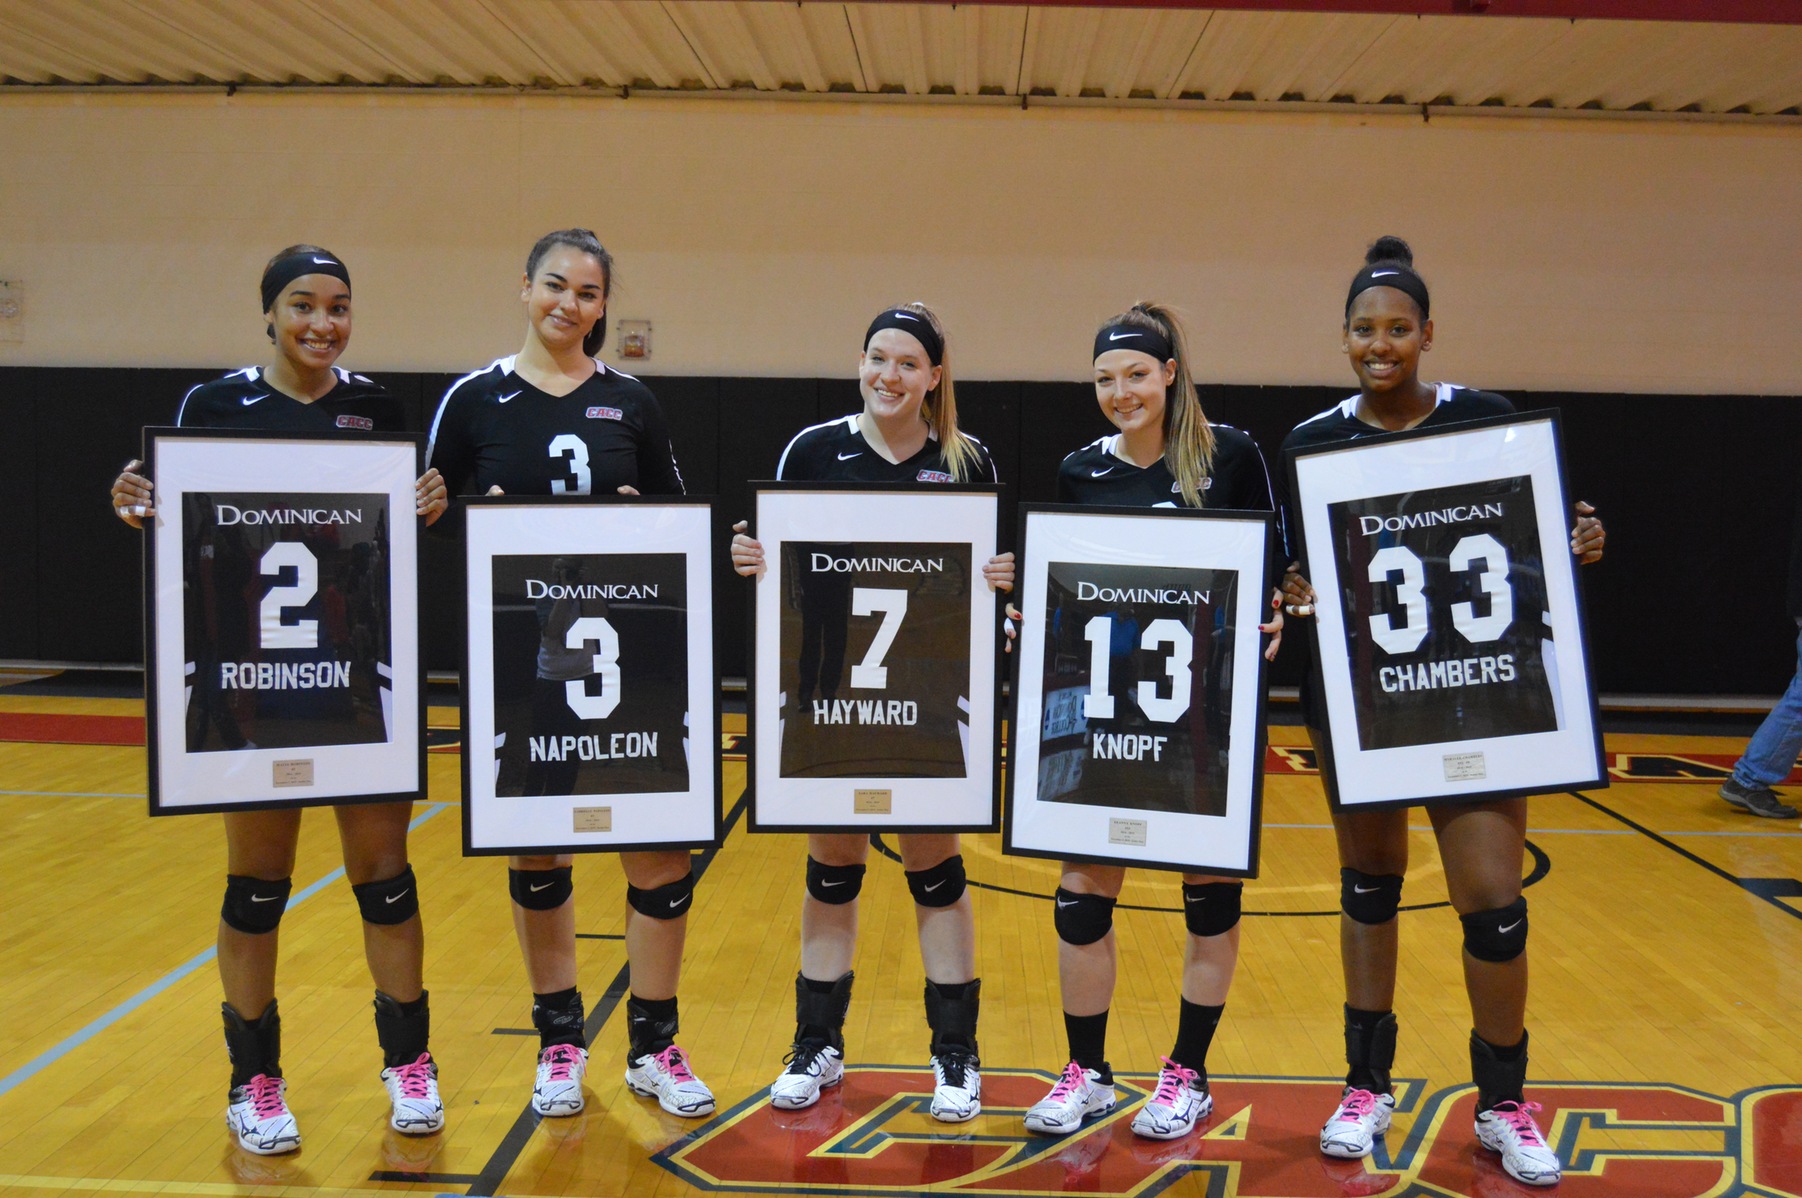 WOMEN'S VOLLEYBALL DROP CONFERENCE MATCH TO HOLY FAMILY ON SENIOR DAY